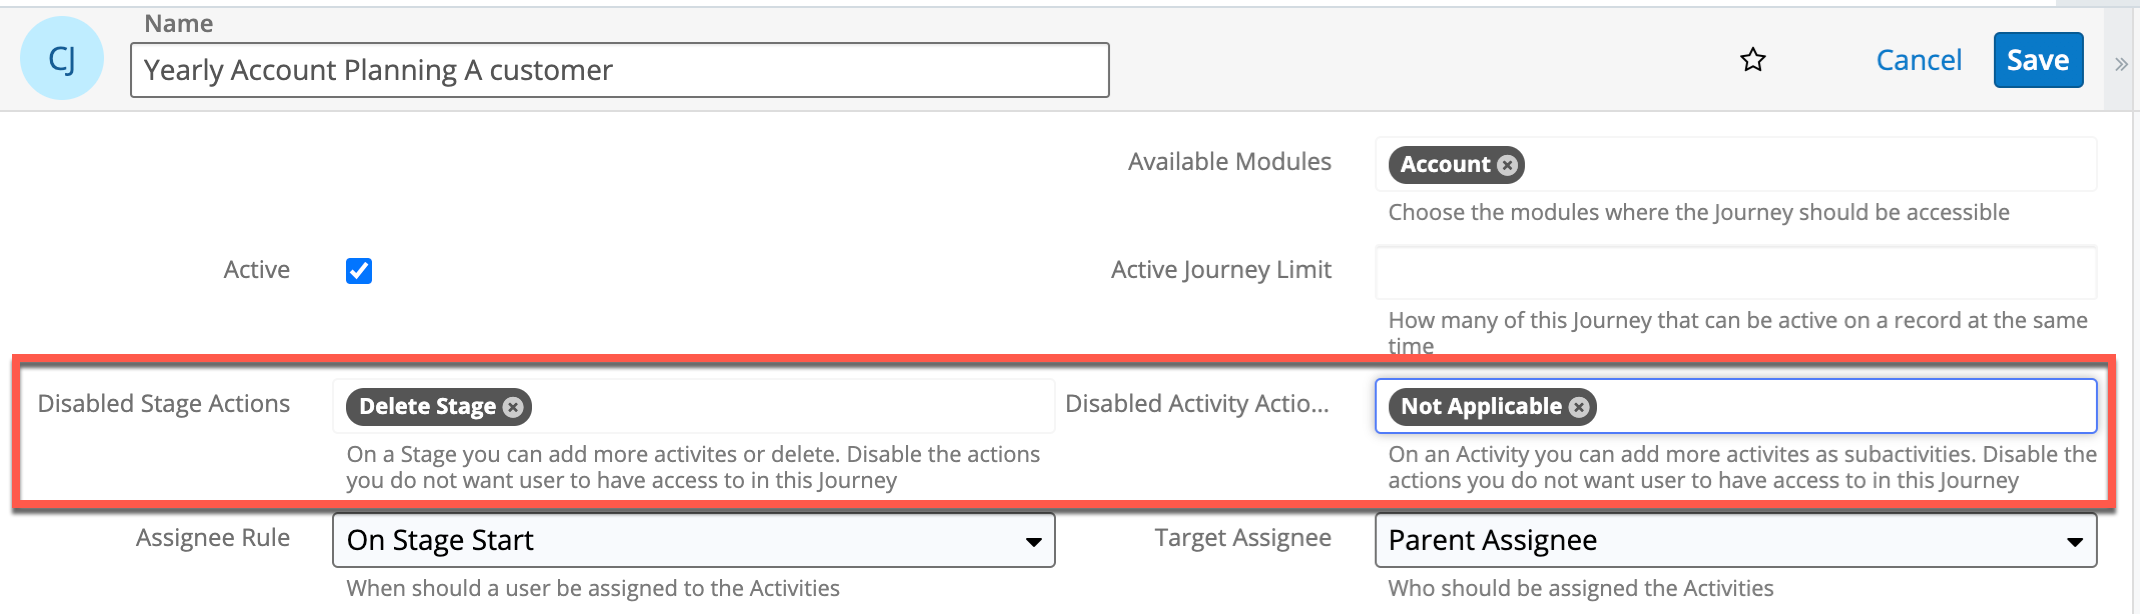 disable-actions